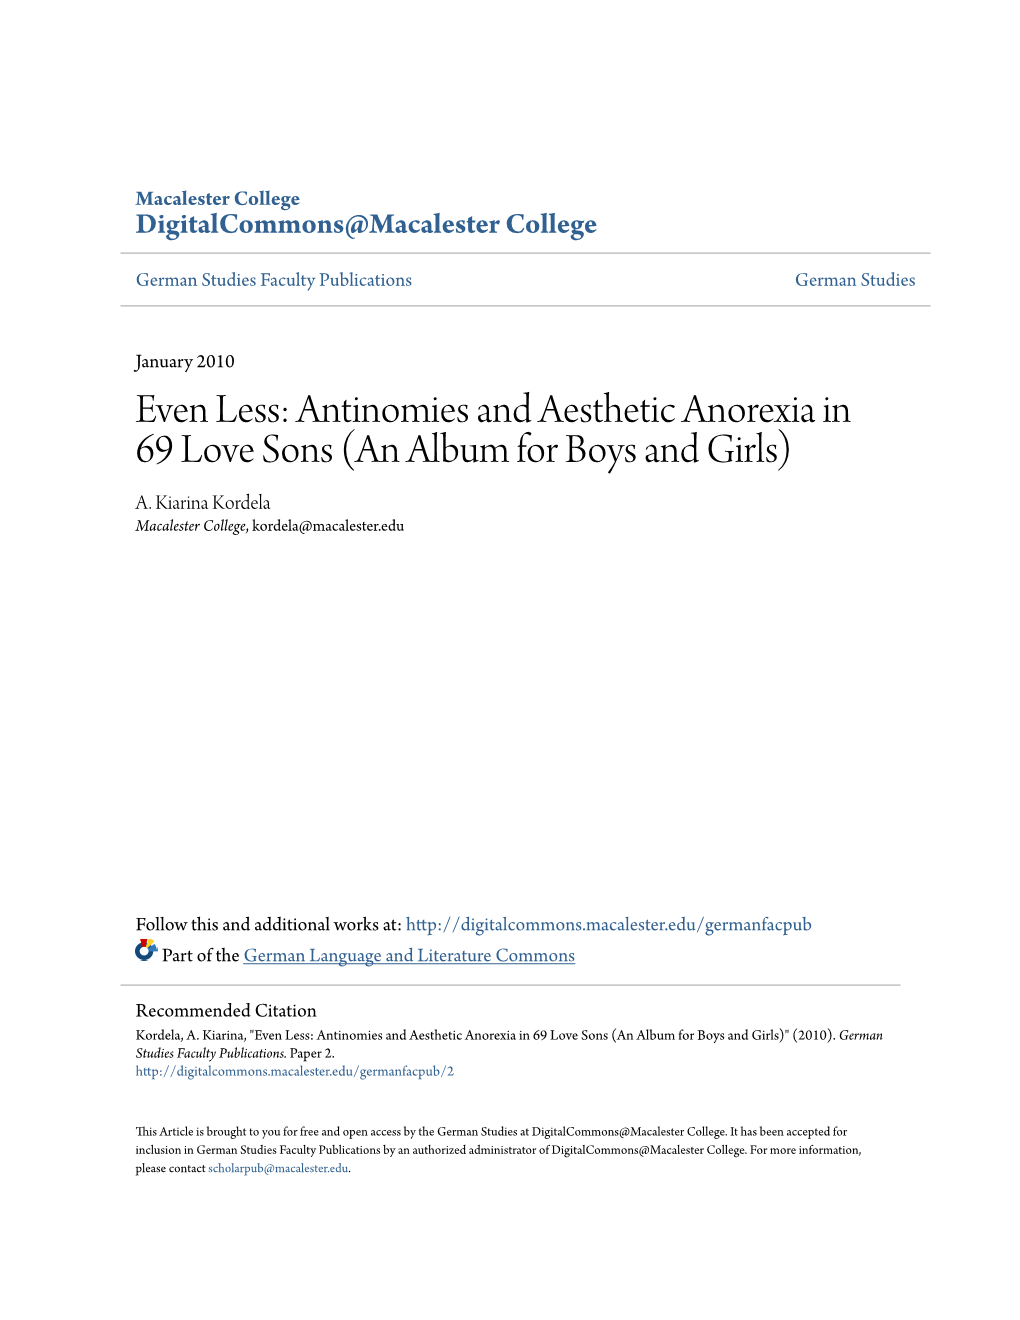 Antinomies and Aesthetic Anorexia in 69 Love Sons (An Album for Boys and Girls) A